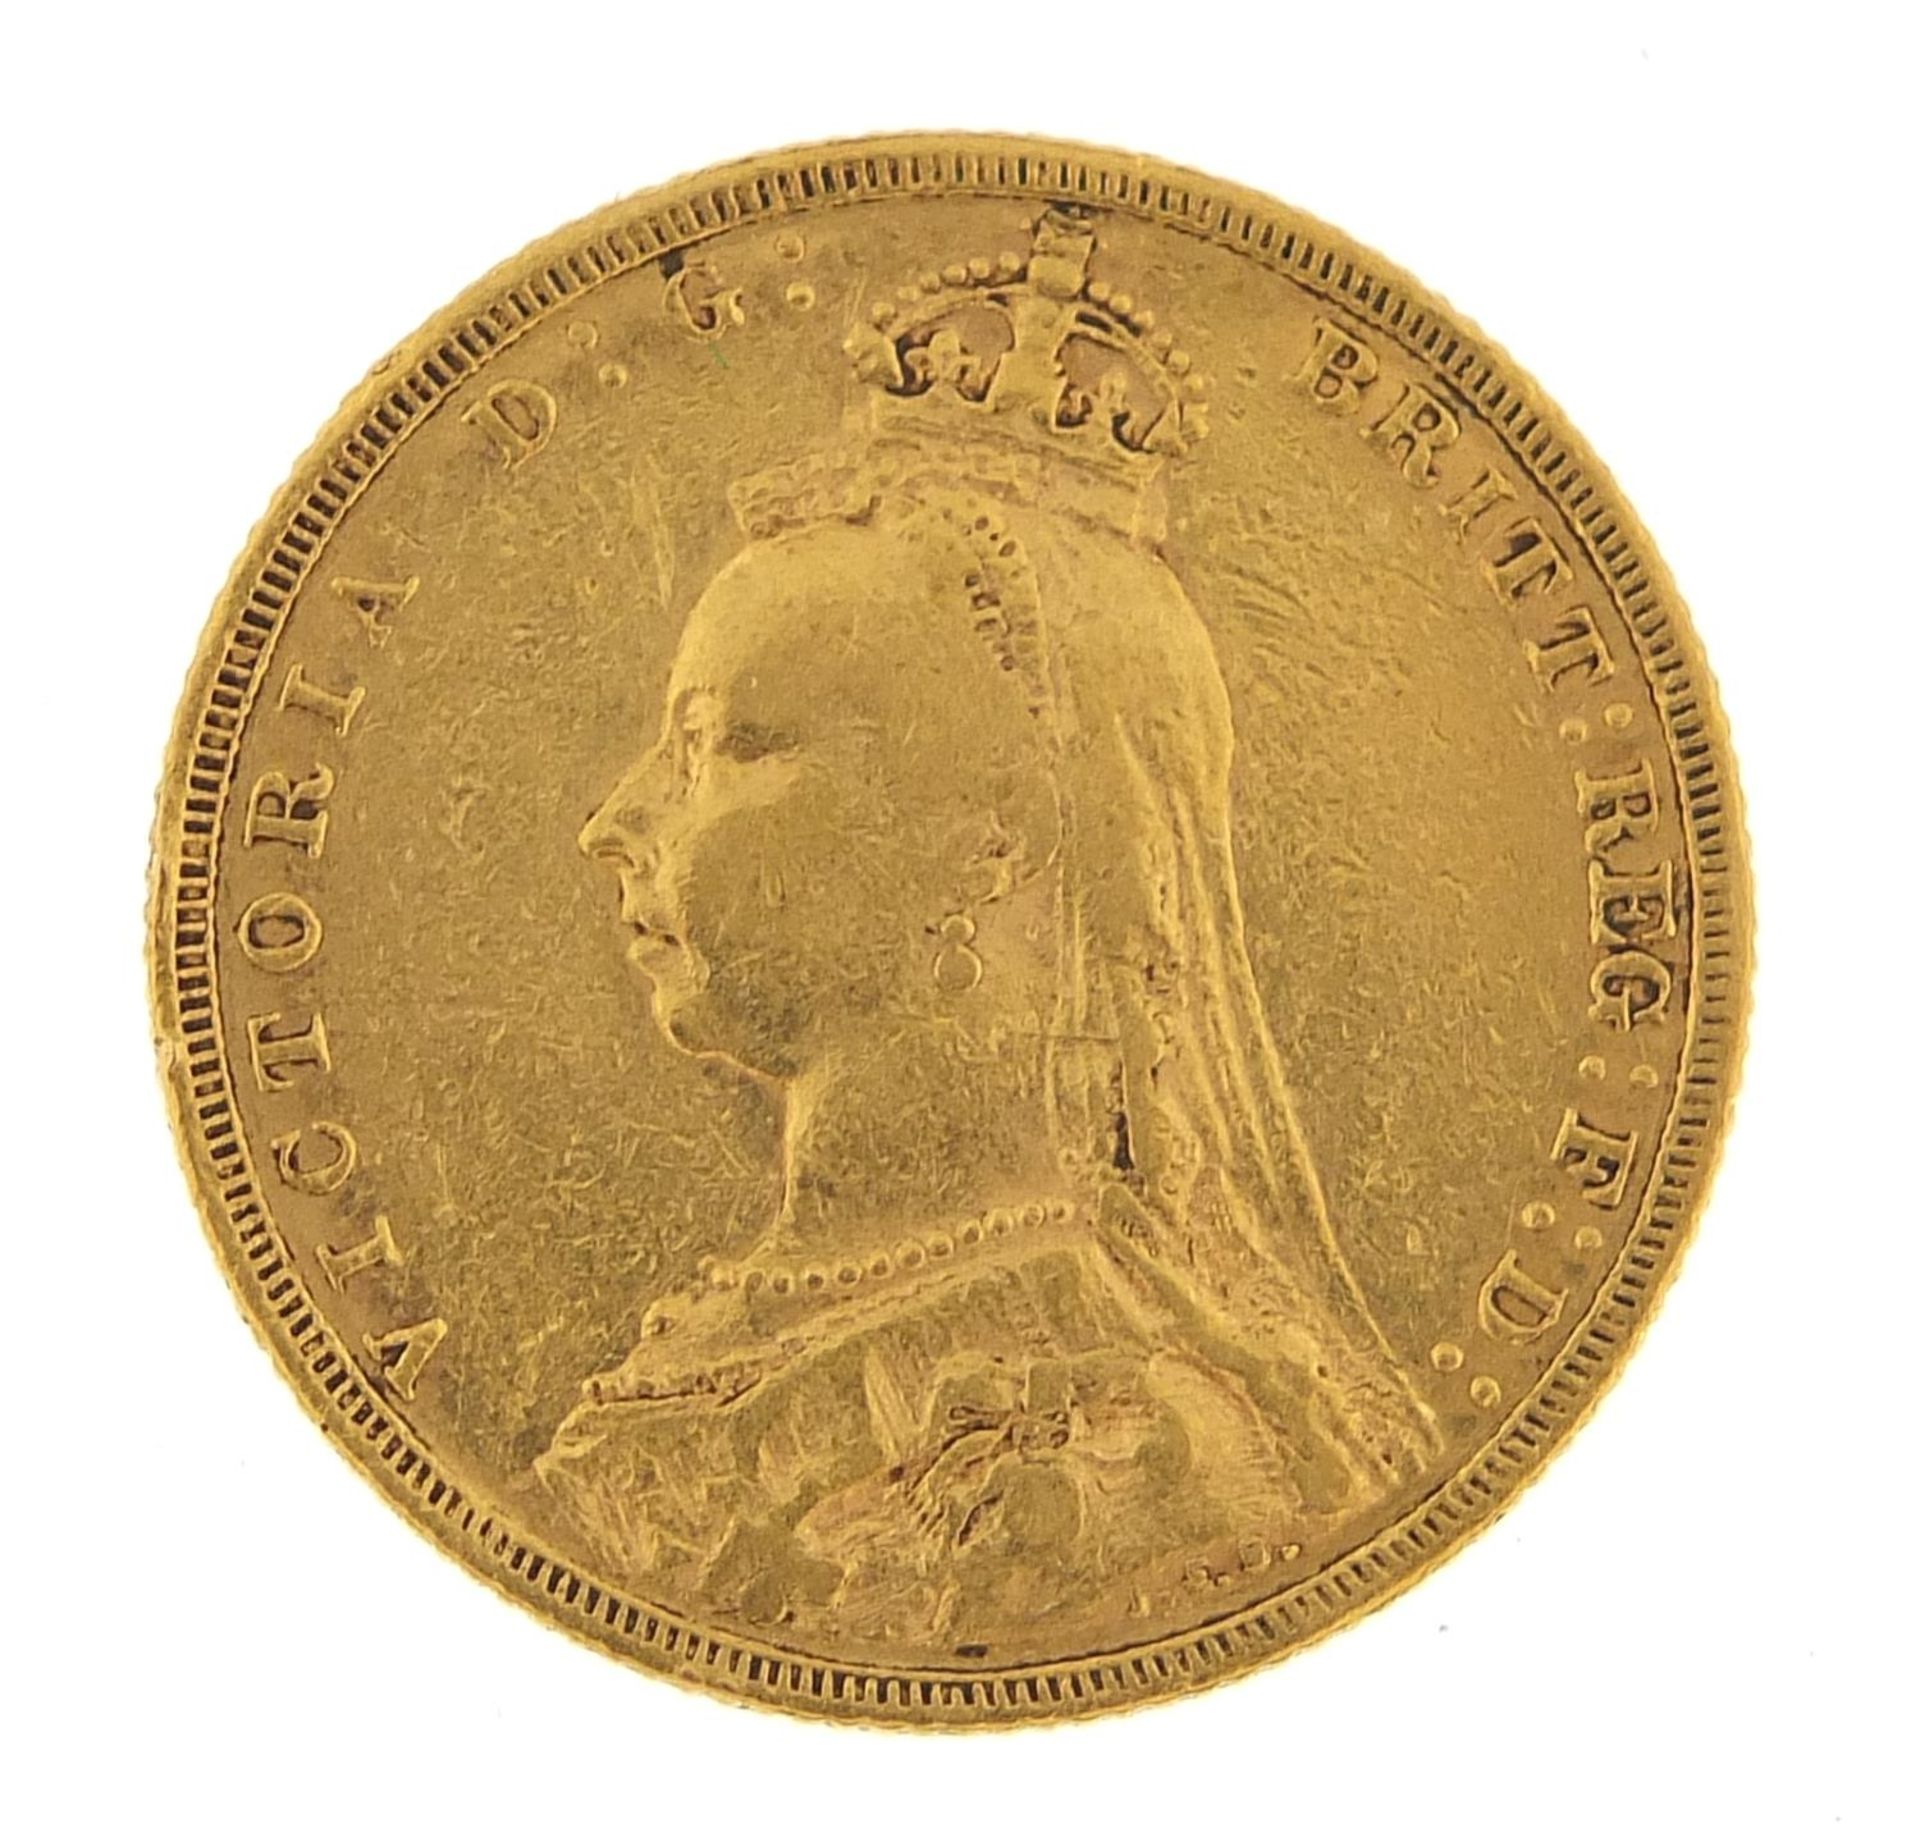 Queen Victoria Jubilee Head 1890 gold sovereign, Melbourne mint - this lot is sold without buyer?s - Image 2 of 3